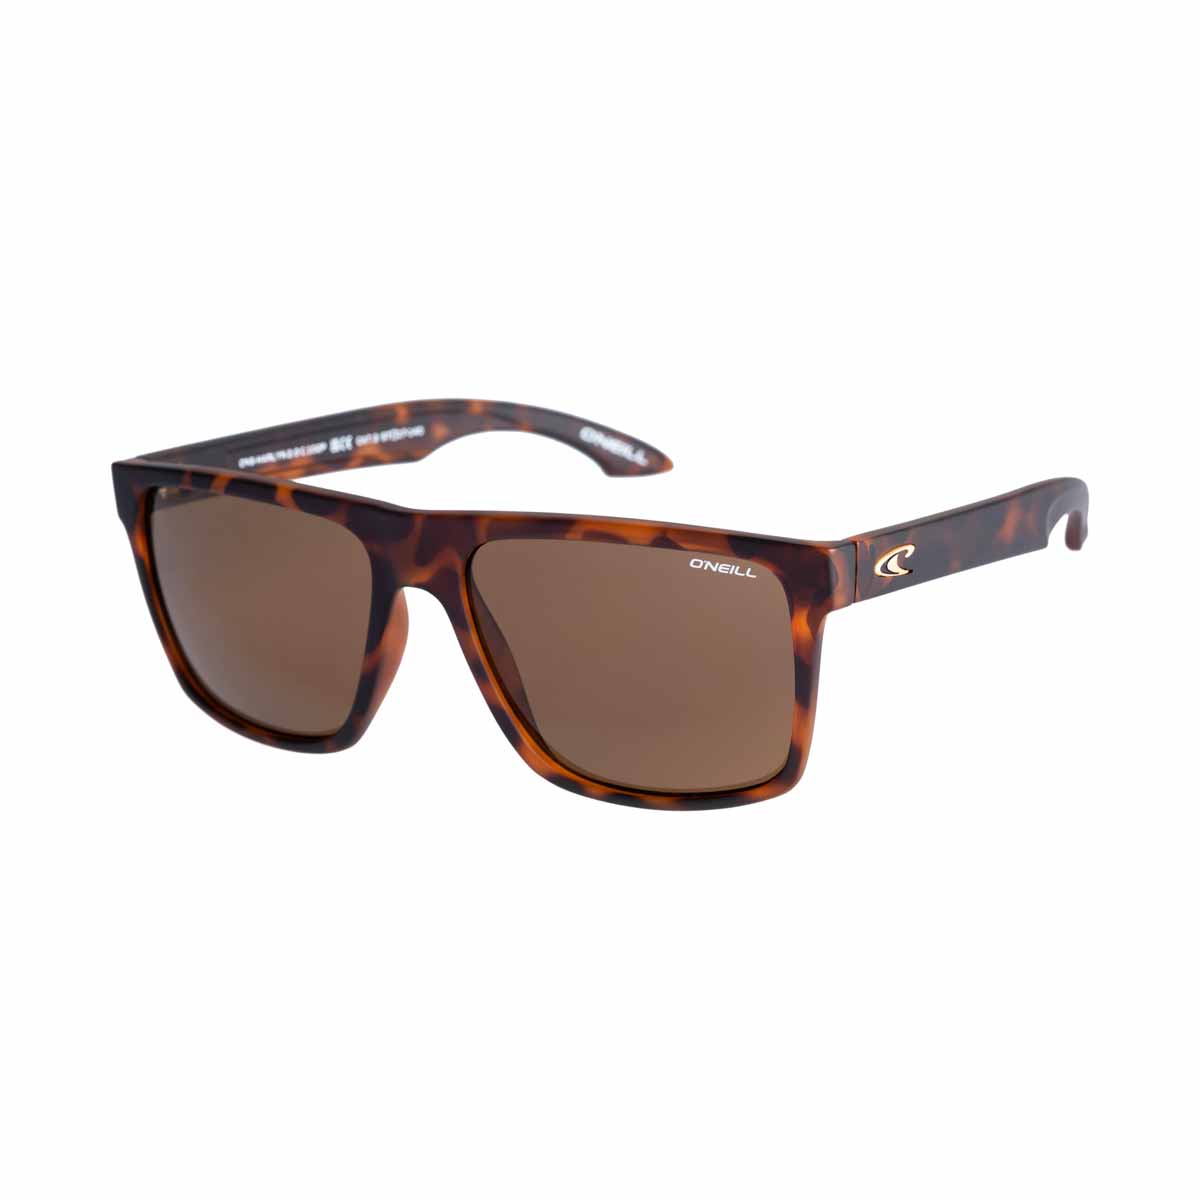 O'Neill Harlyn 2.0 Sunglasses – 102P Matte tort / Solid brown